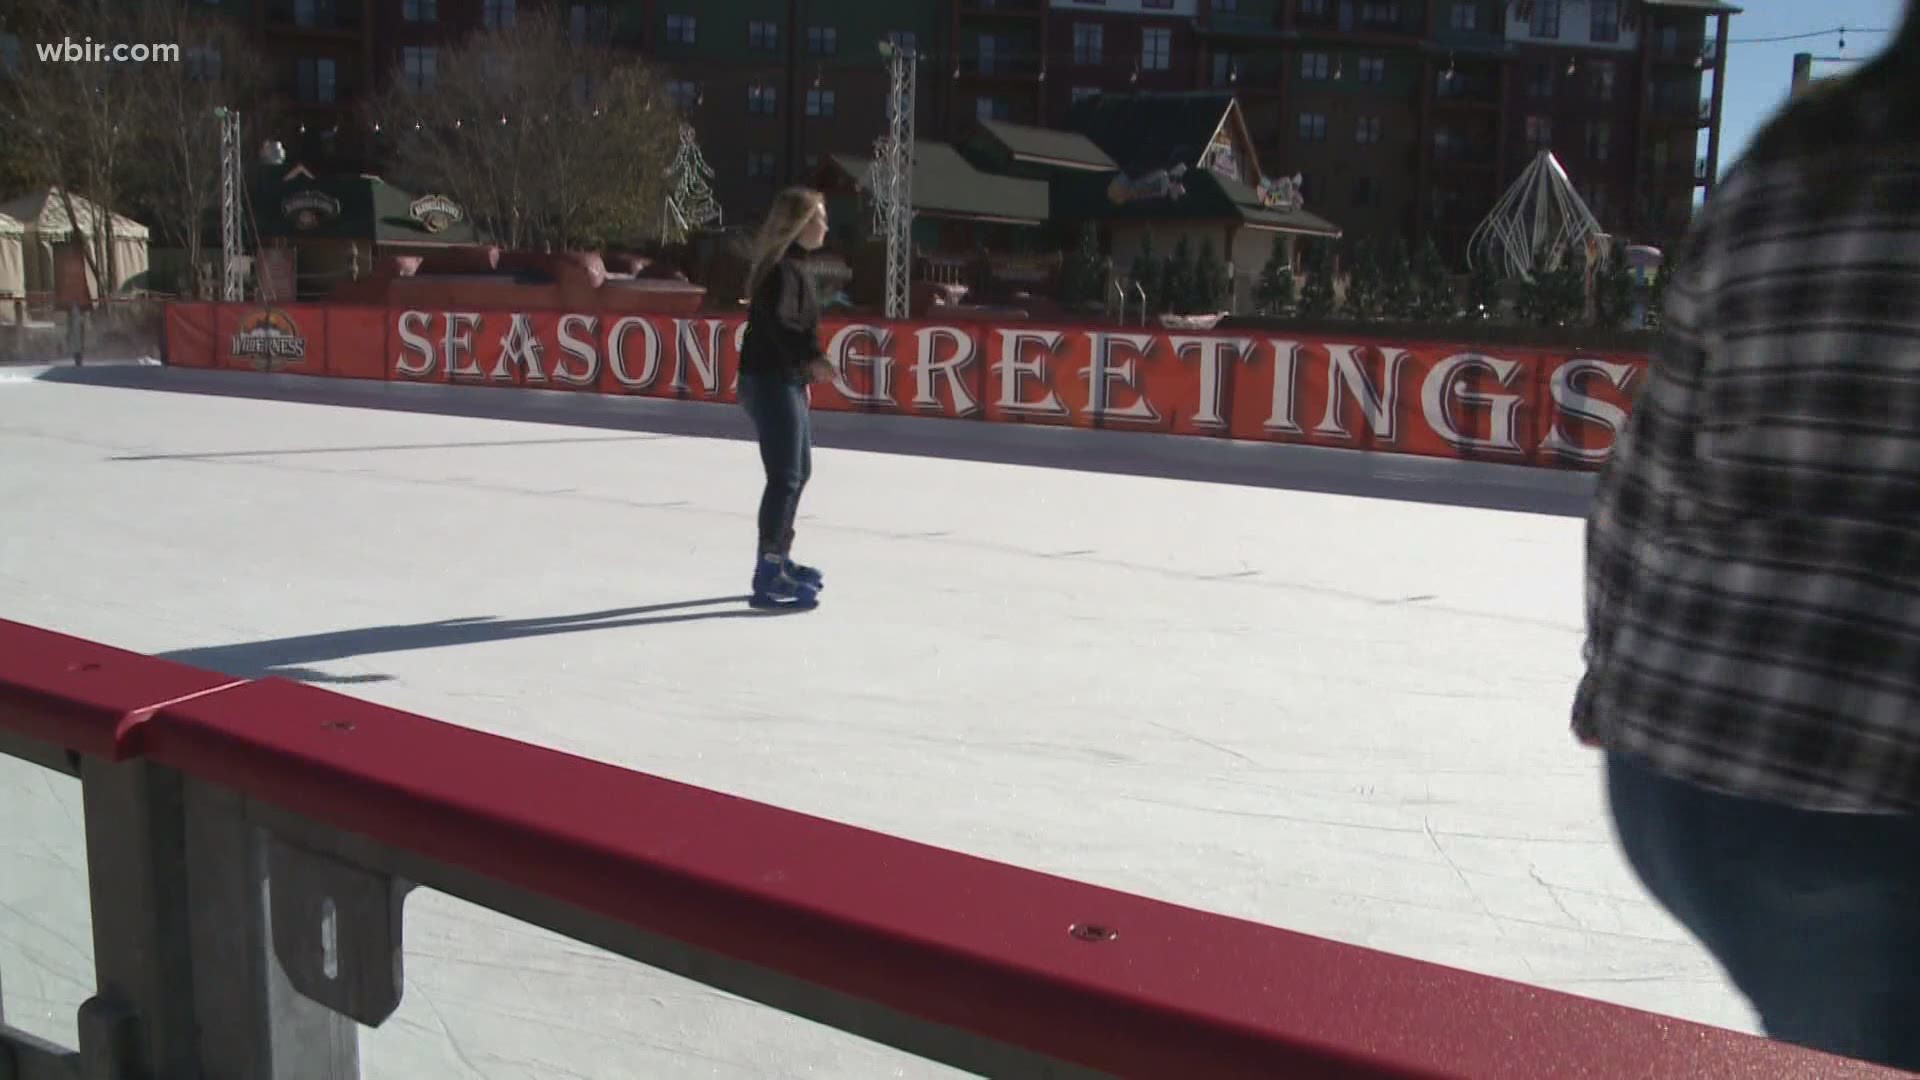 The ice rink at Wilderness at the Smokies is open for the 2020 season